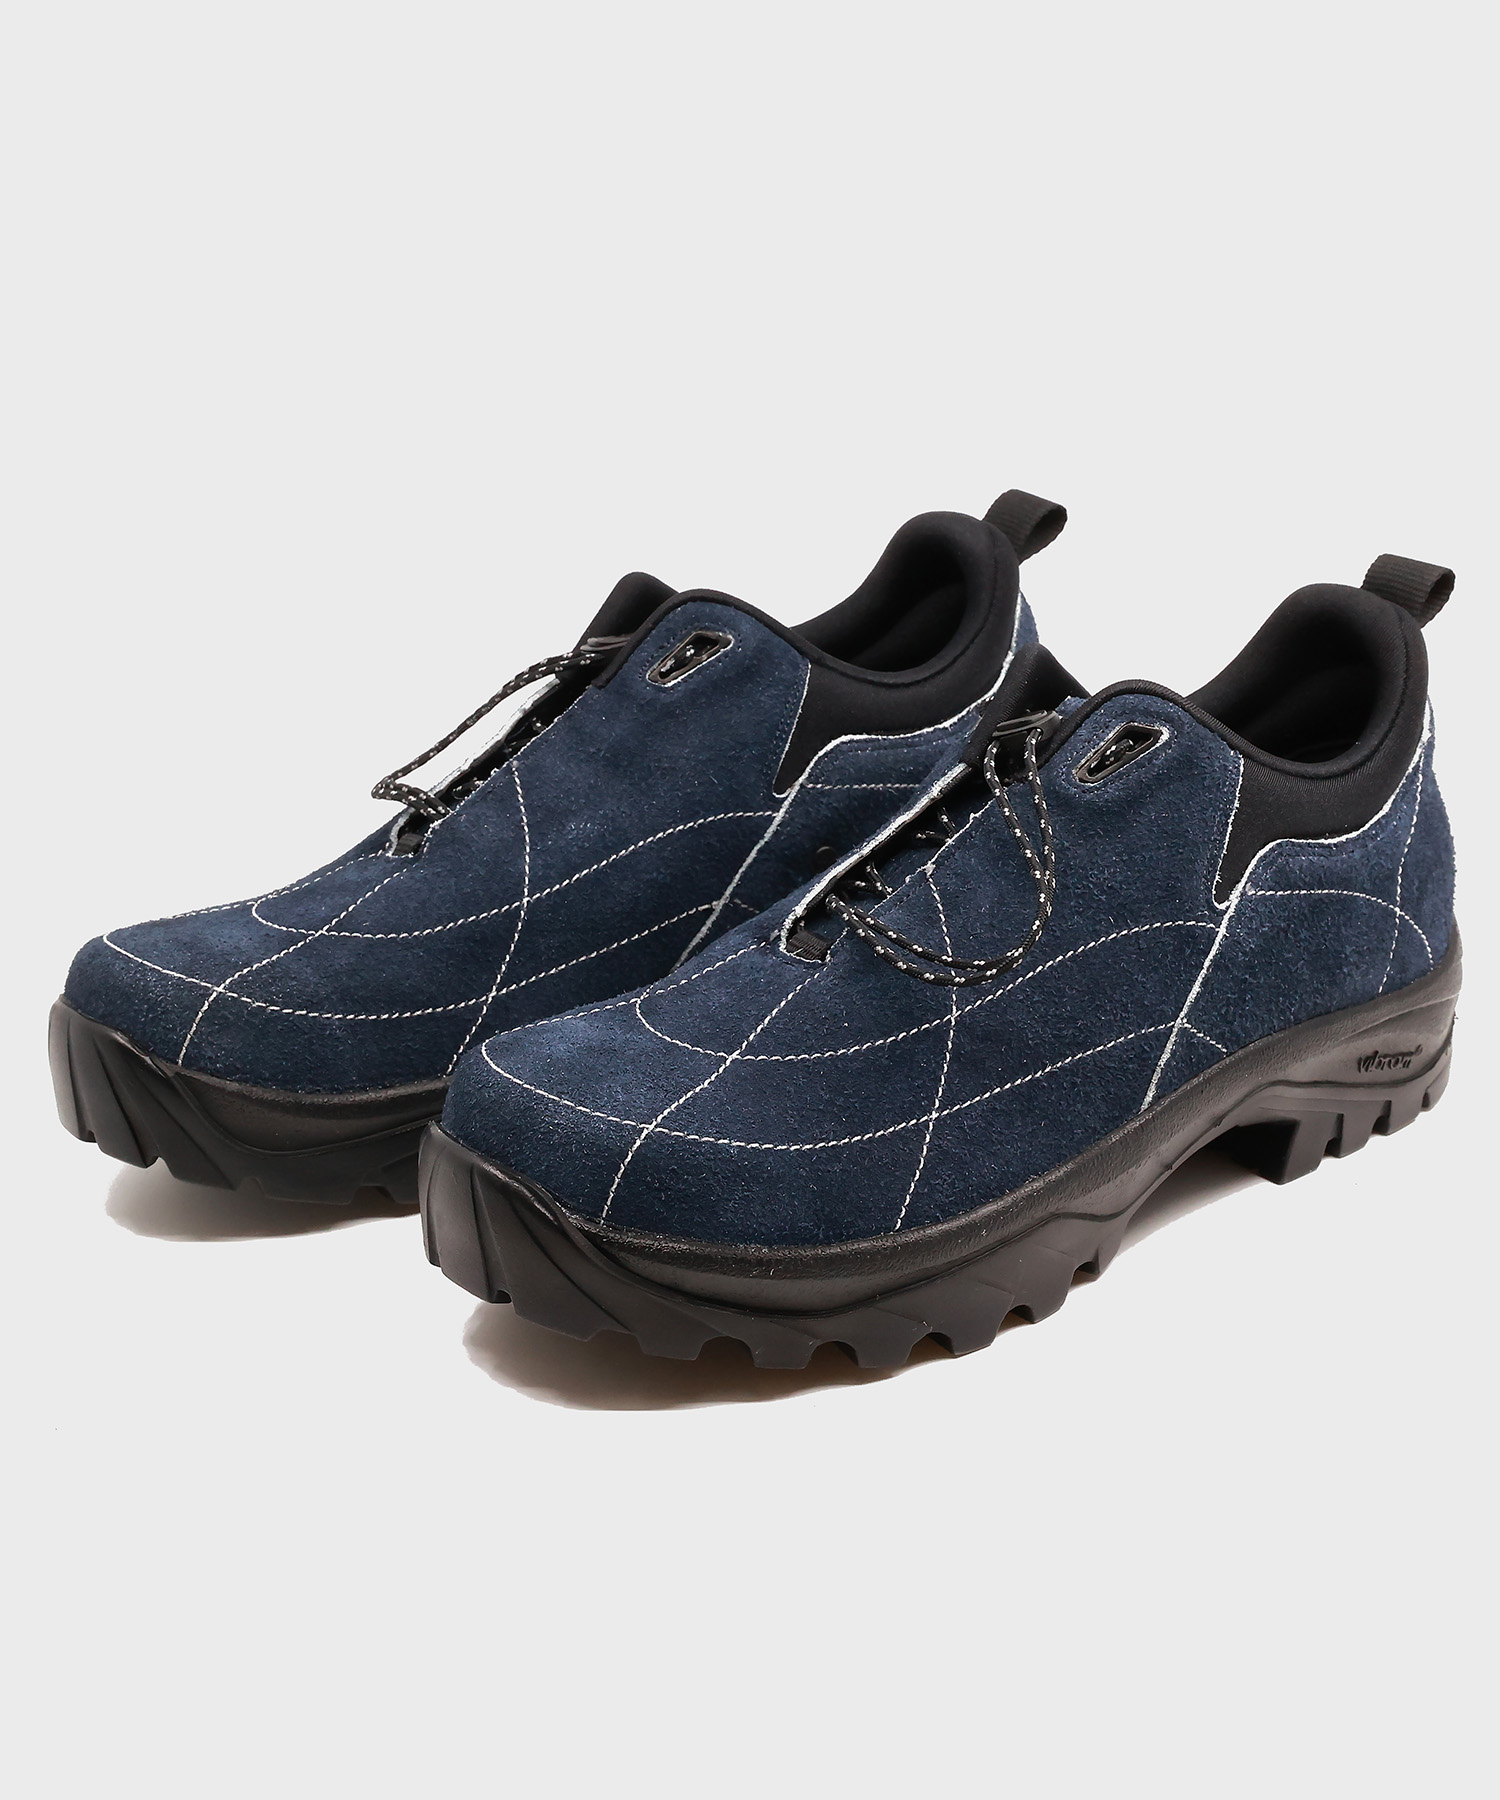 Forest Hiking Shoes Navy